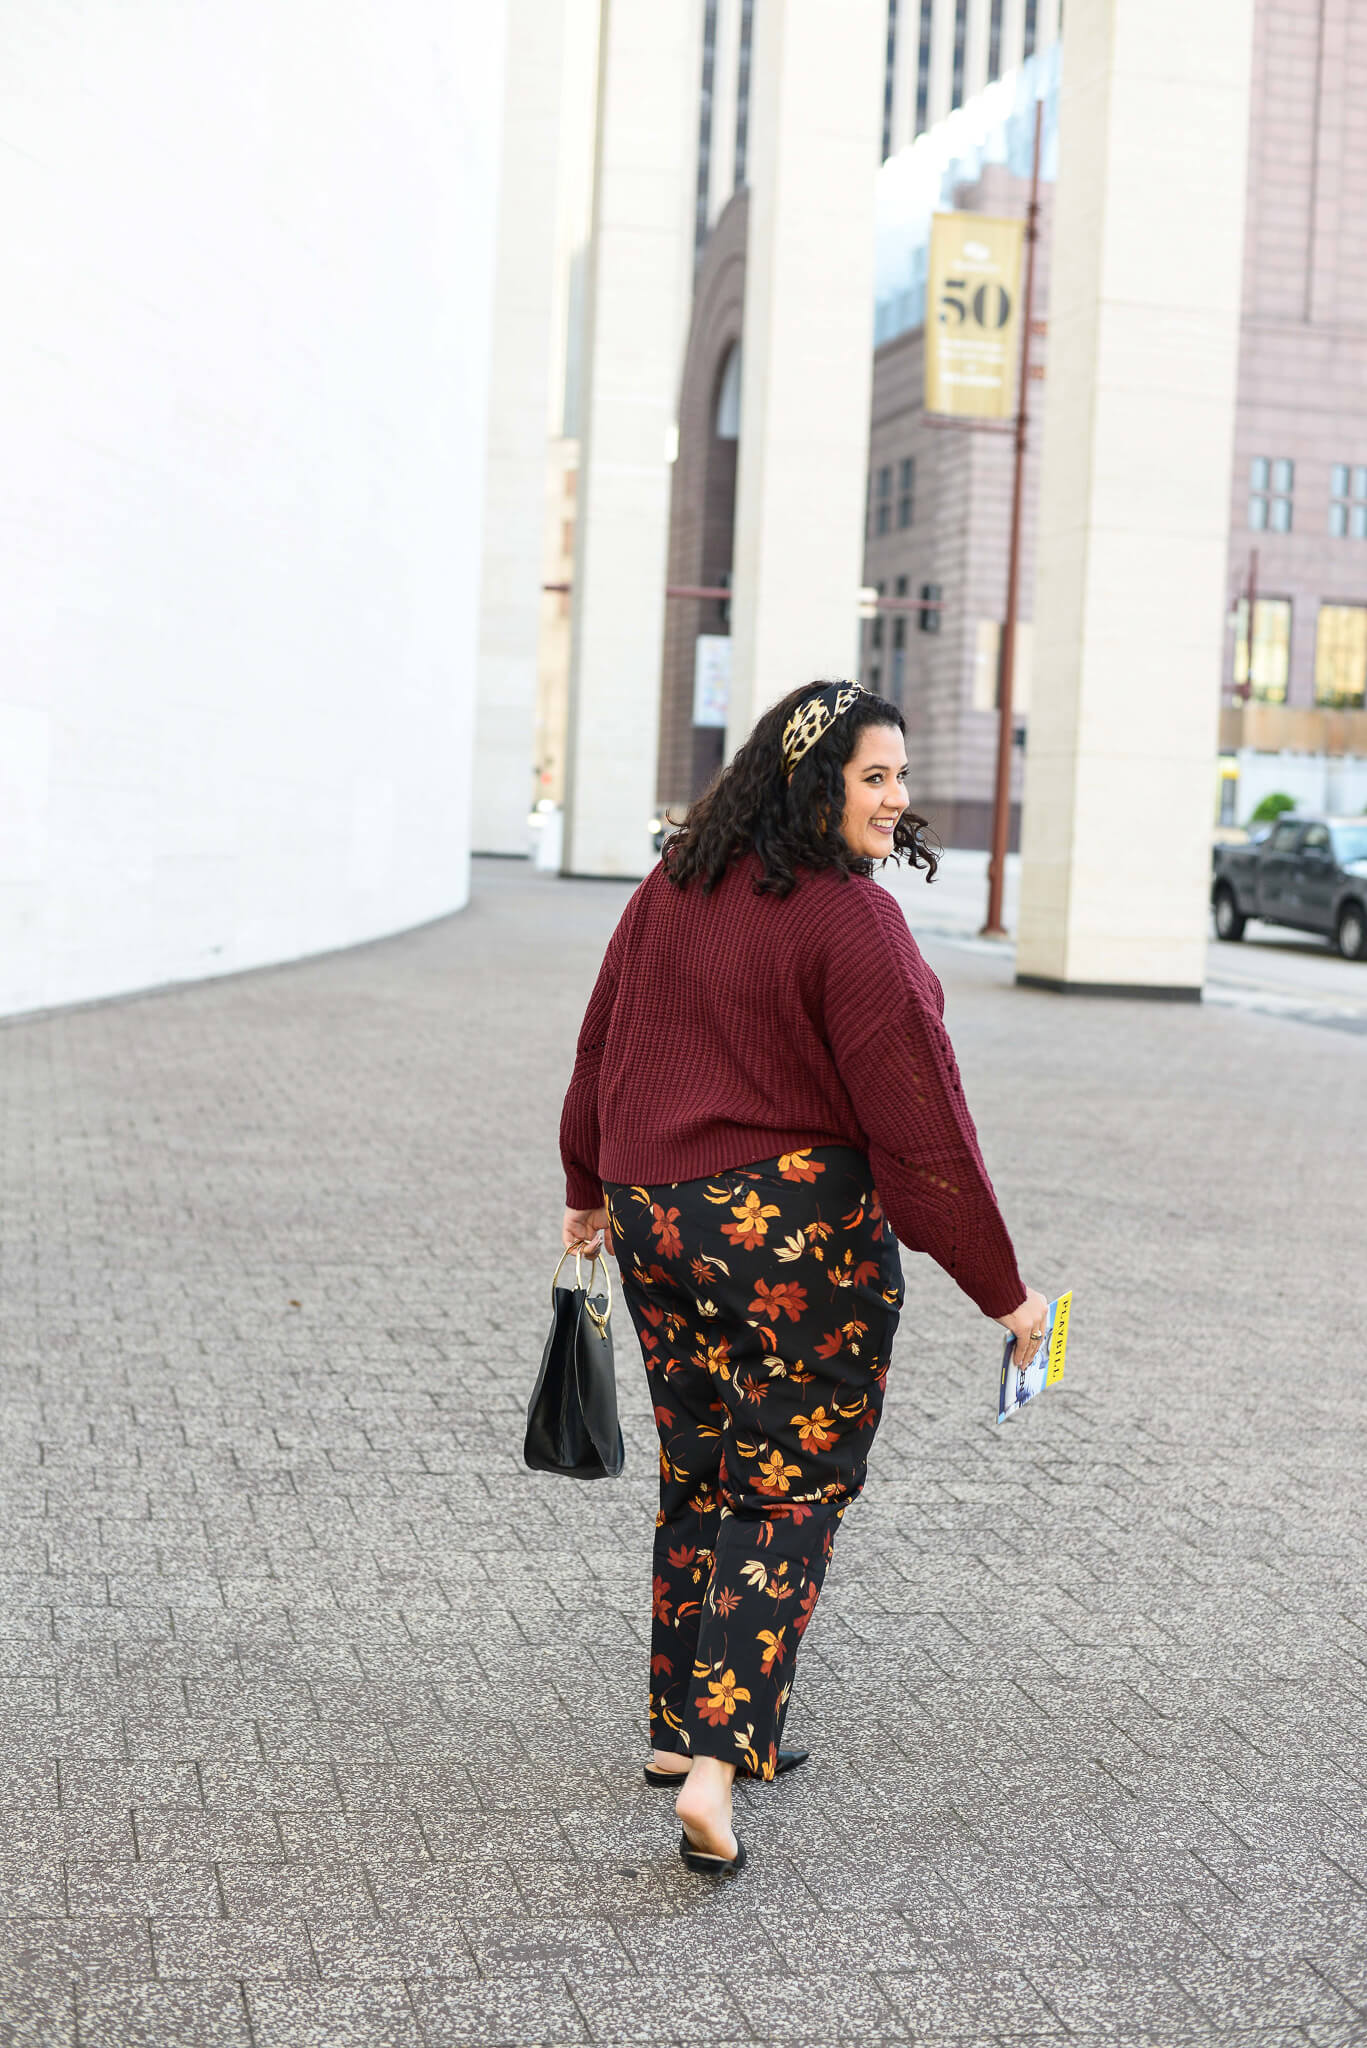 I love being able to be creative when dressing for a musical or play when going to the theater. These printed floral pants is perfect for any plus size ladies wardrobe. 